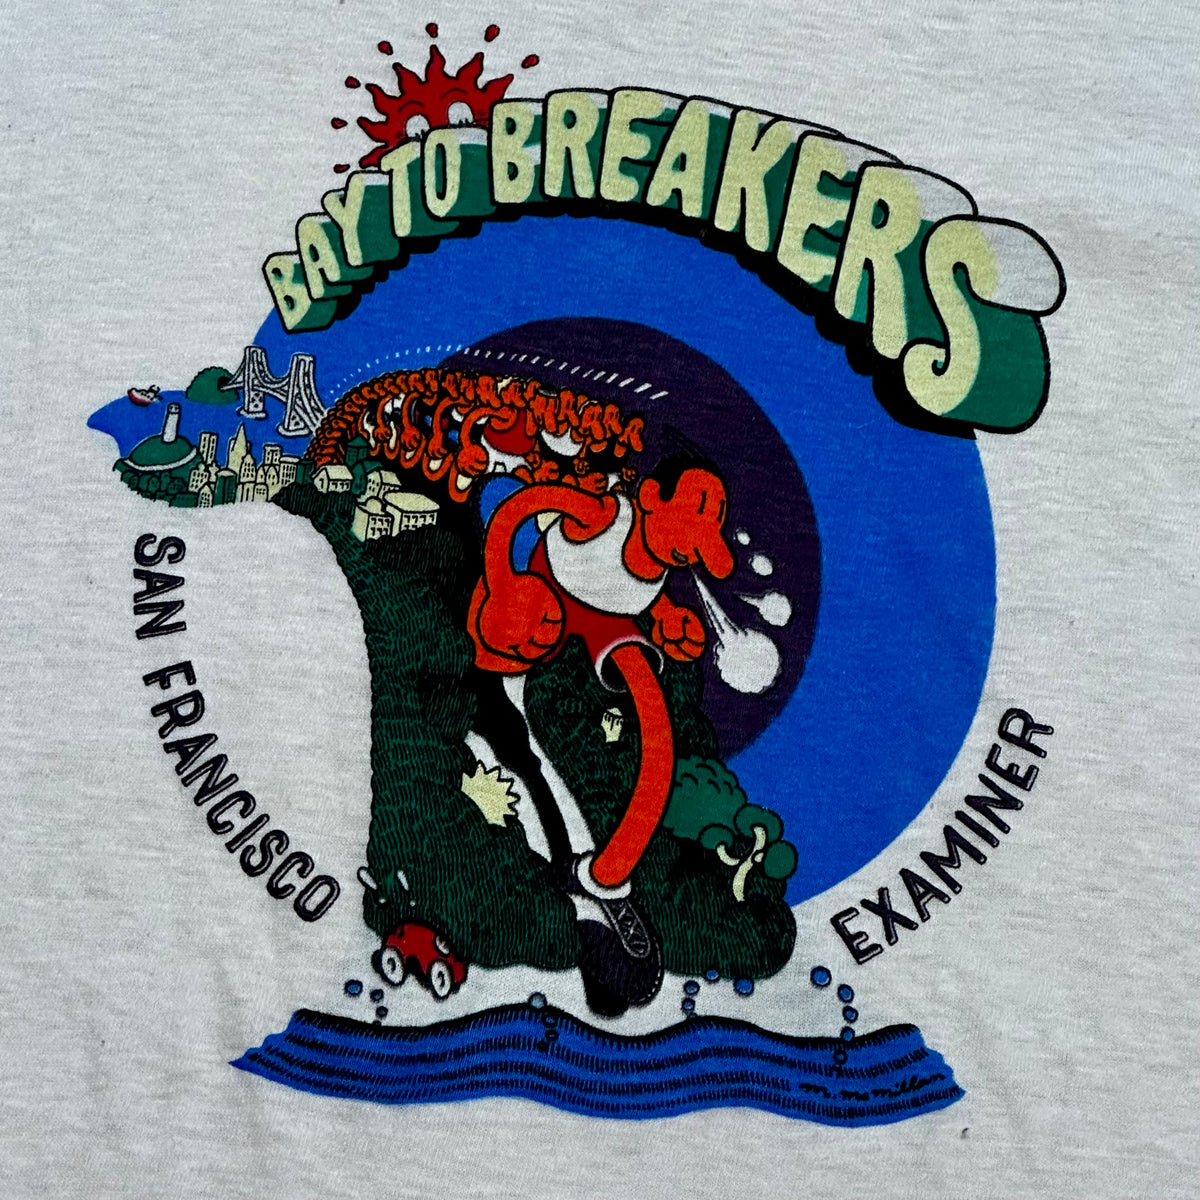 Vintage 1980s Bay To Breakers t-shirt